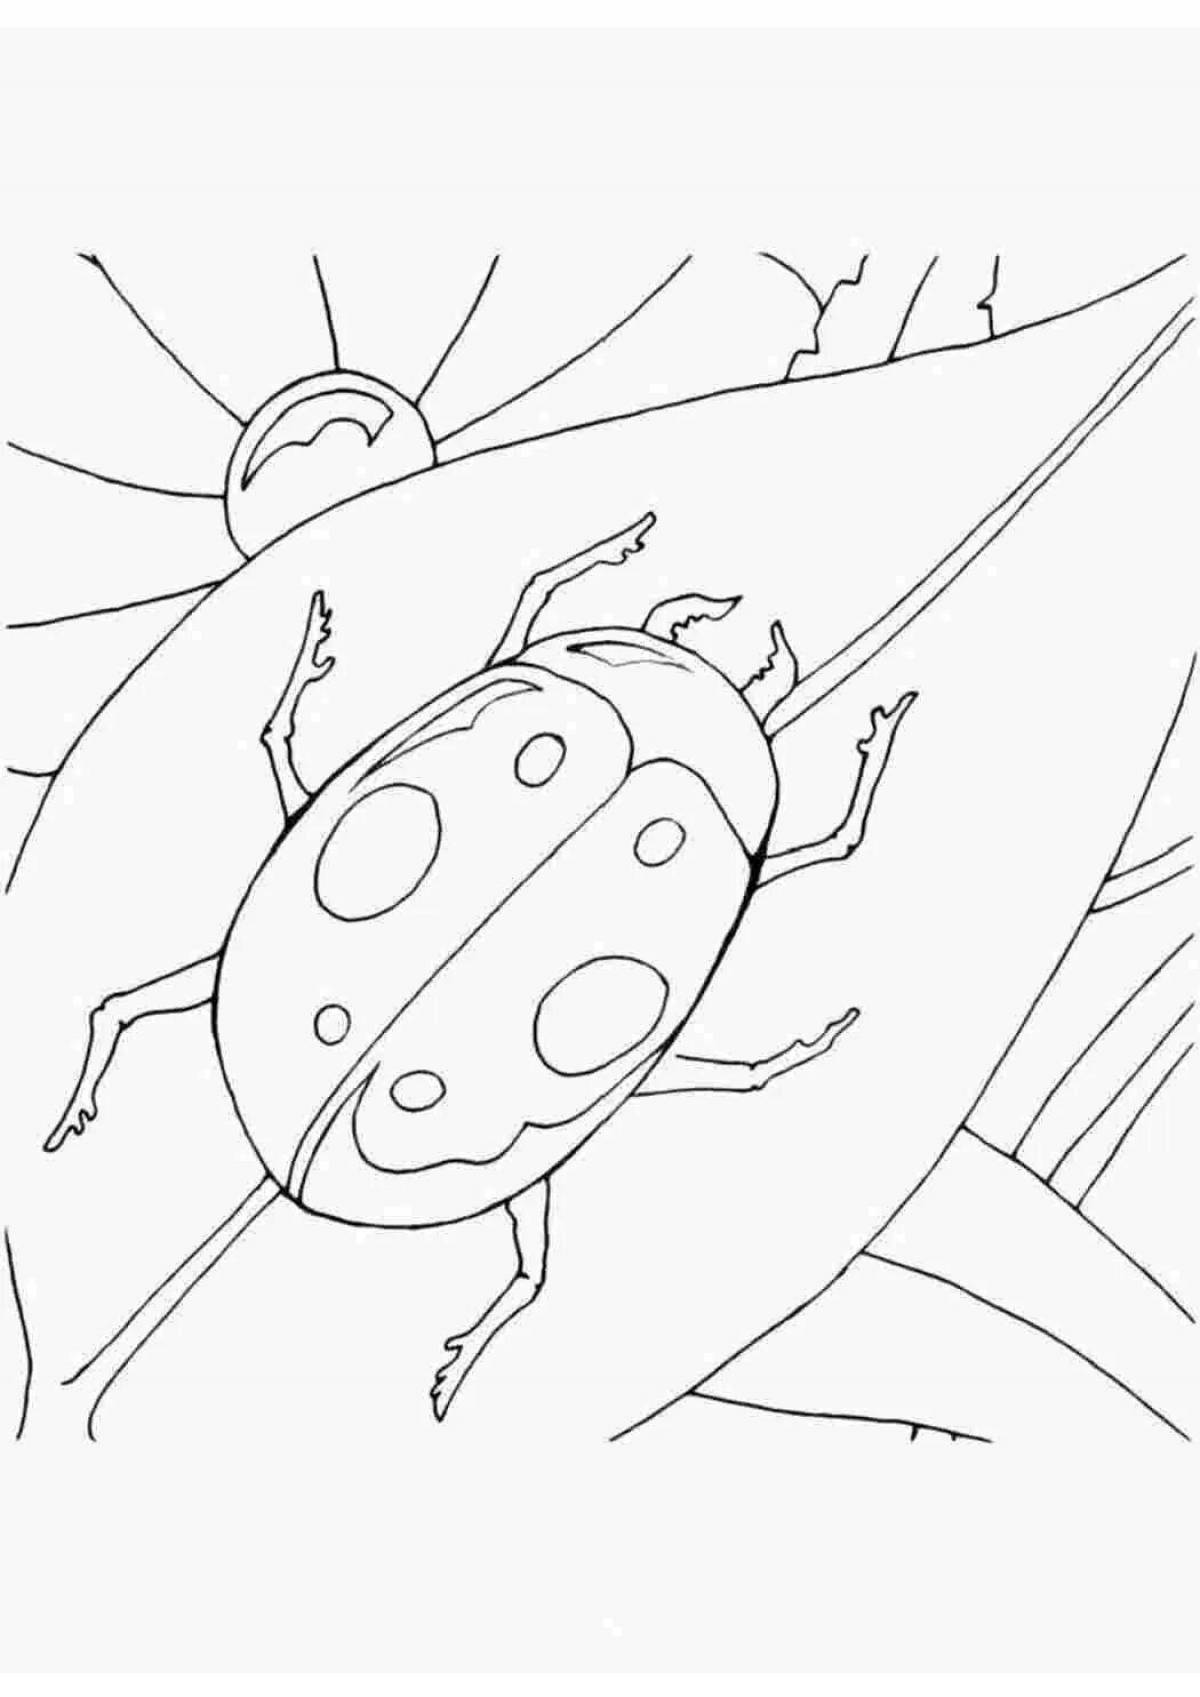 Great coloring book we didn't see the bug